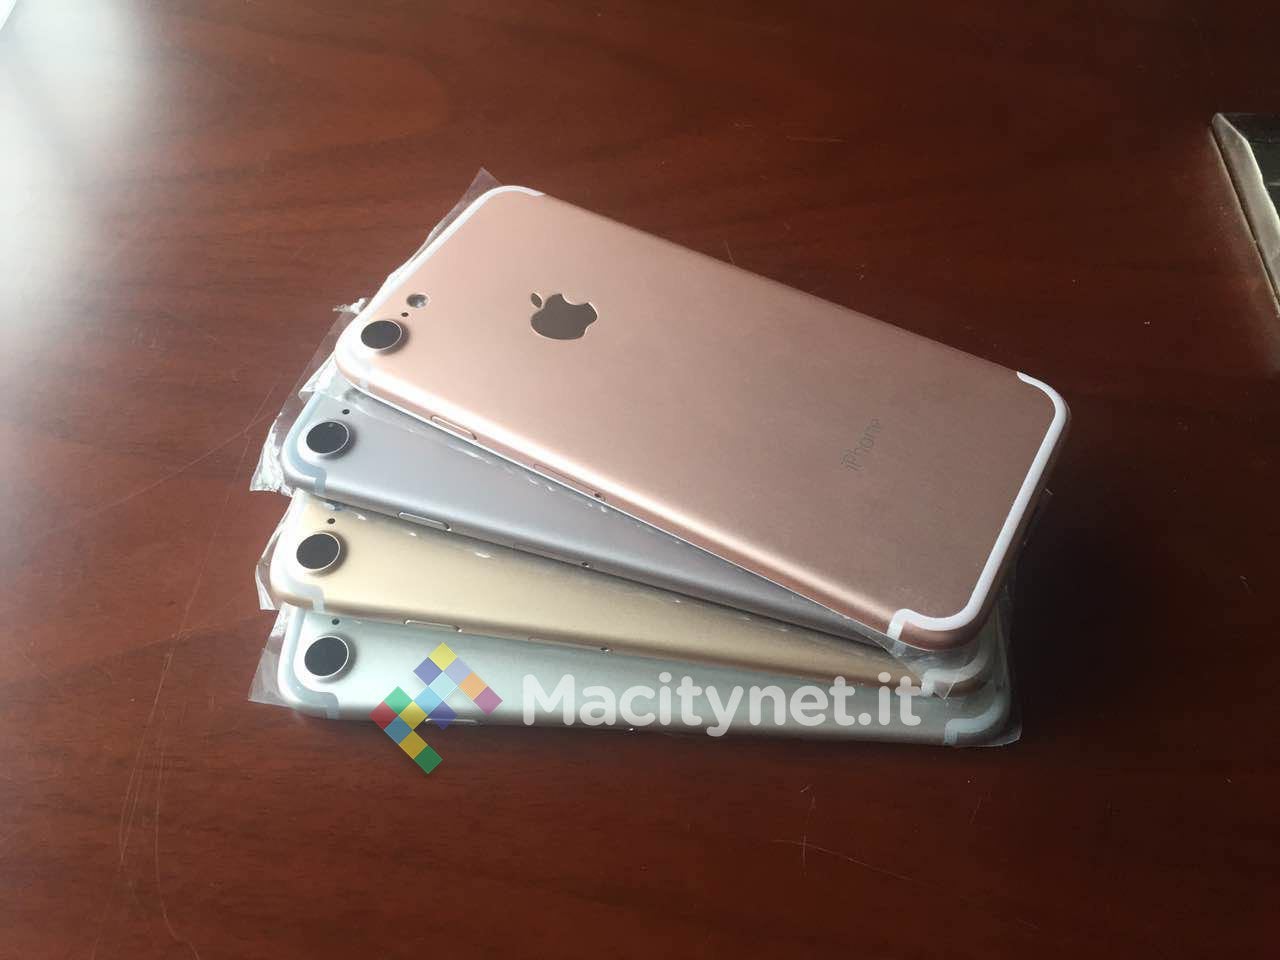 iPhone 7 photos show back shells in all four colors — no Space Black to be seen